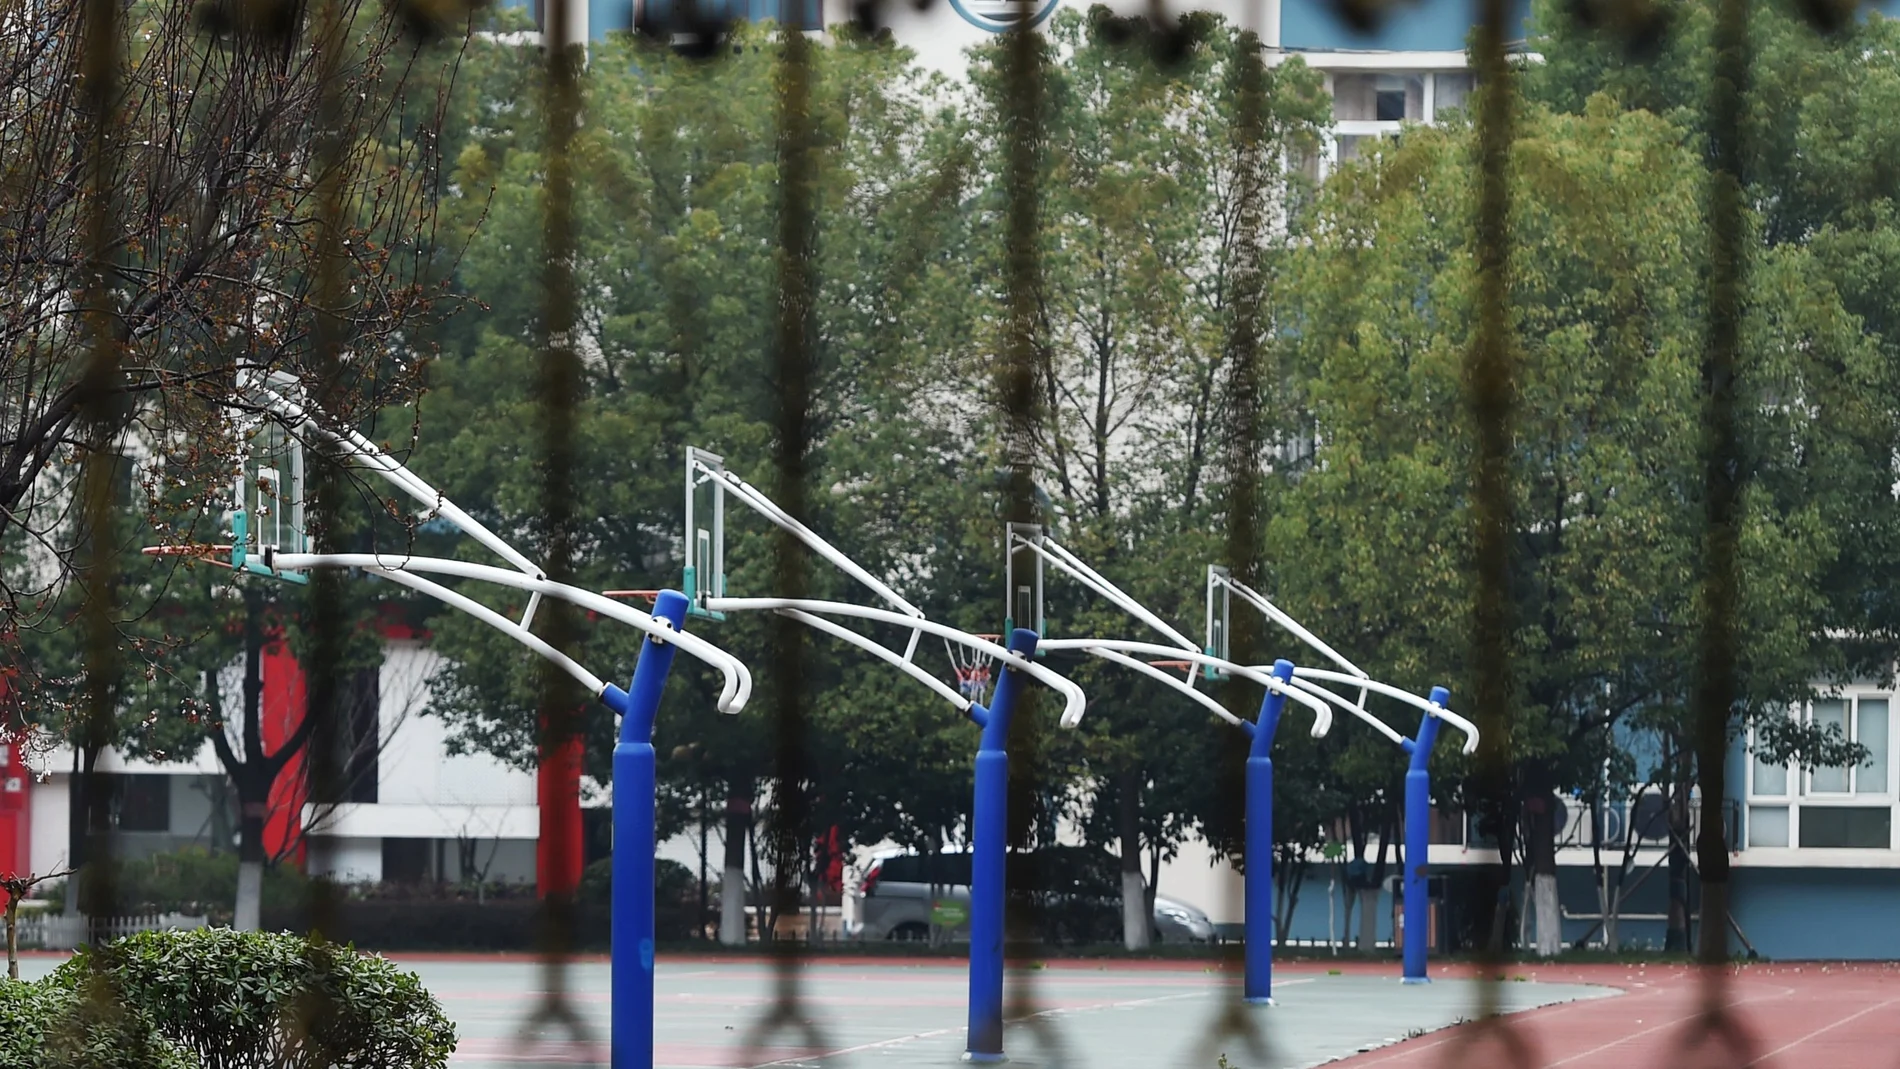 Basketball courts are seen behind the fence of a closed secondary school in Wuhan, the epicentre of the novel coronavirus outbreak